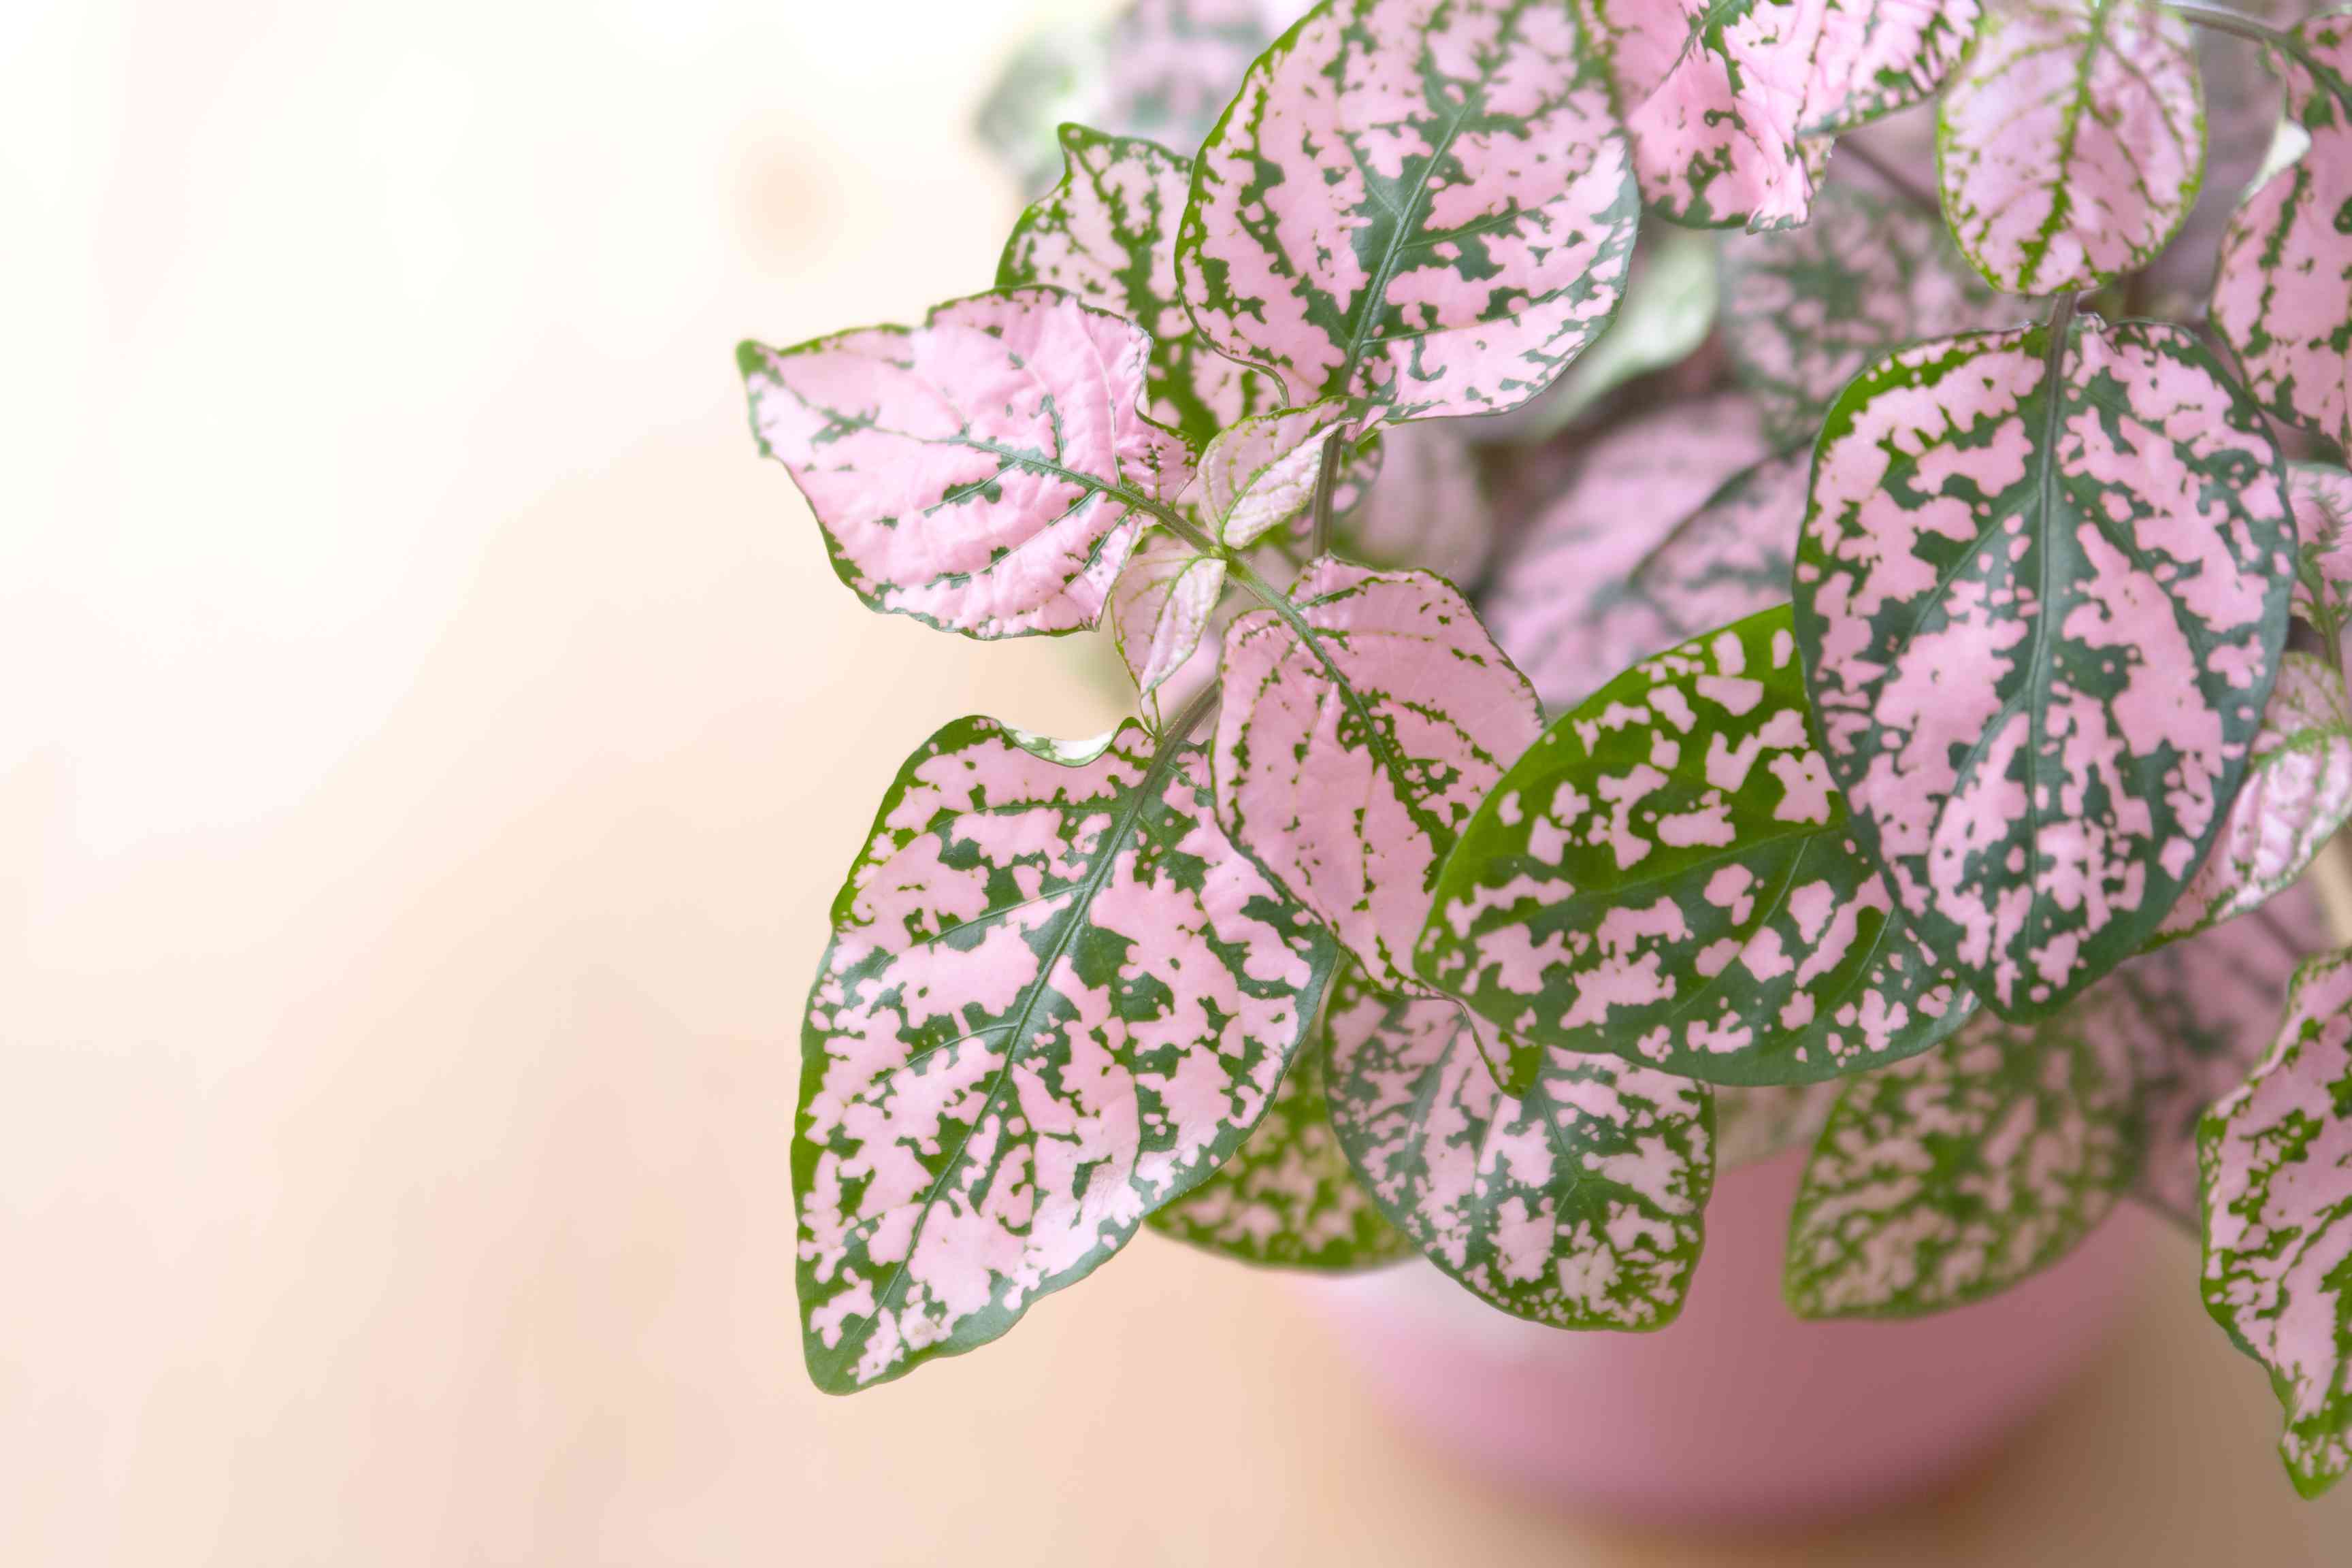 Polka dot plant close up in a pink pot